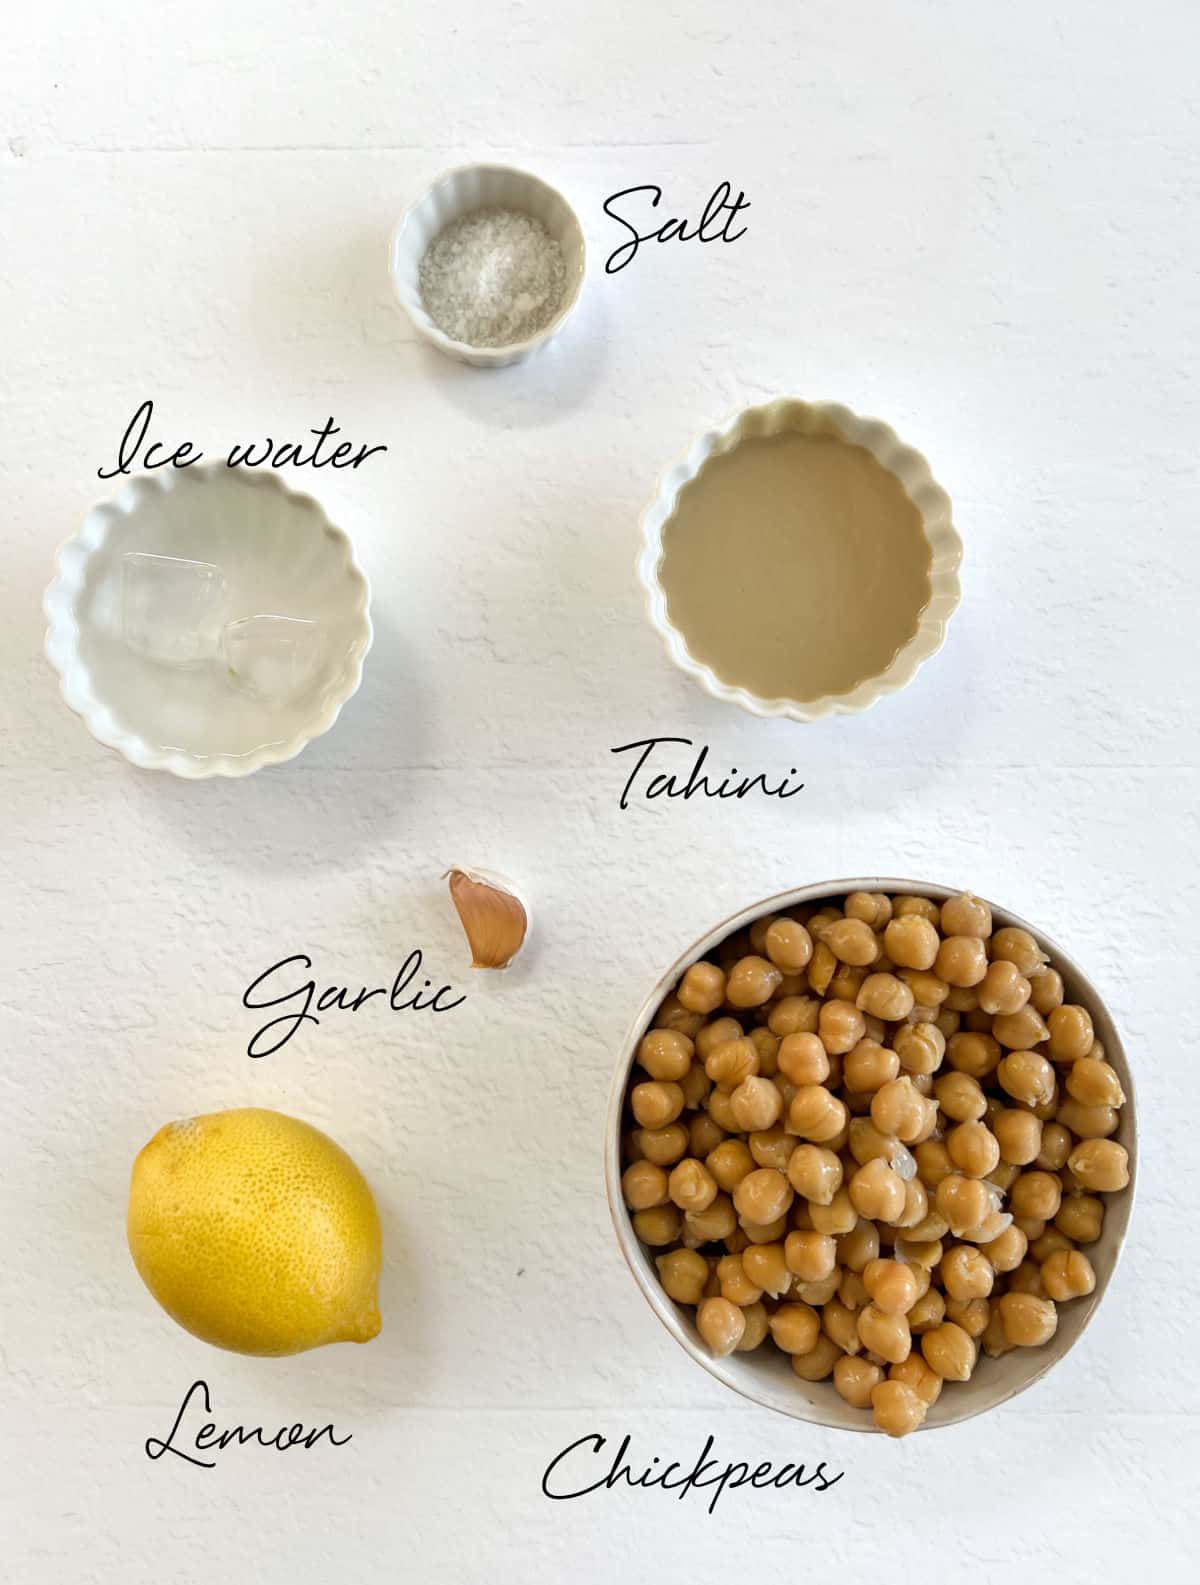 salt, tahini, chickpeas, water, lemon and a clove of garlic laid out in bowls